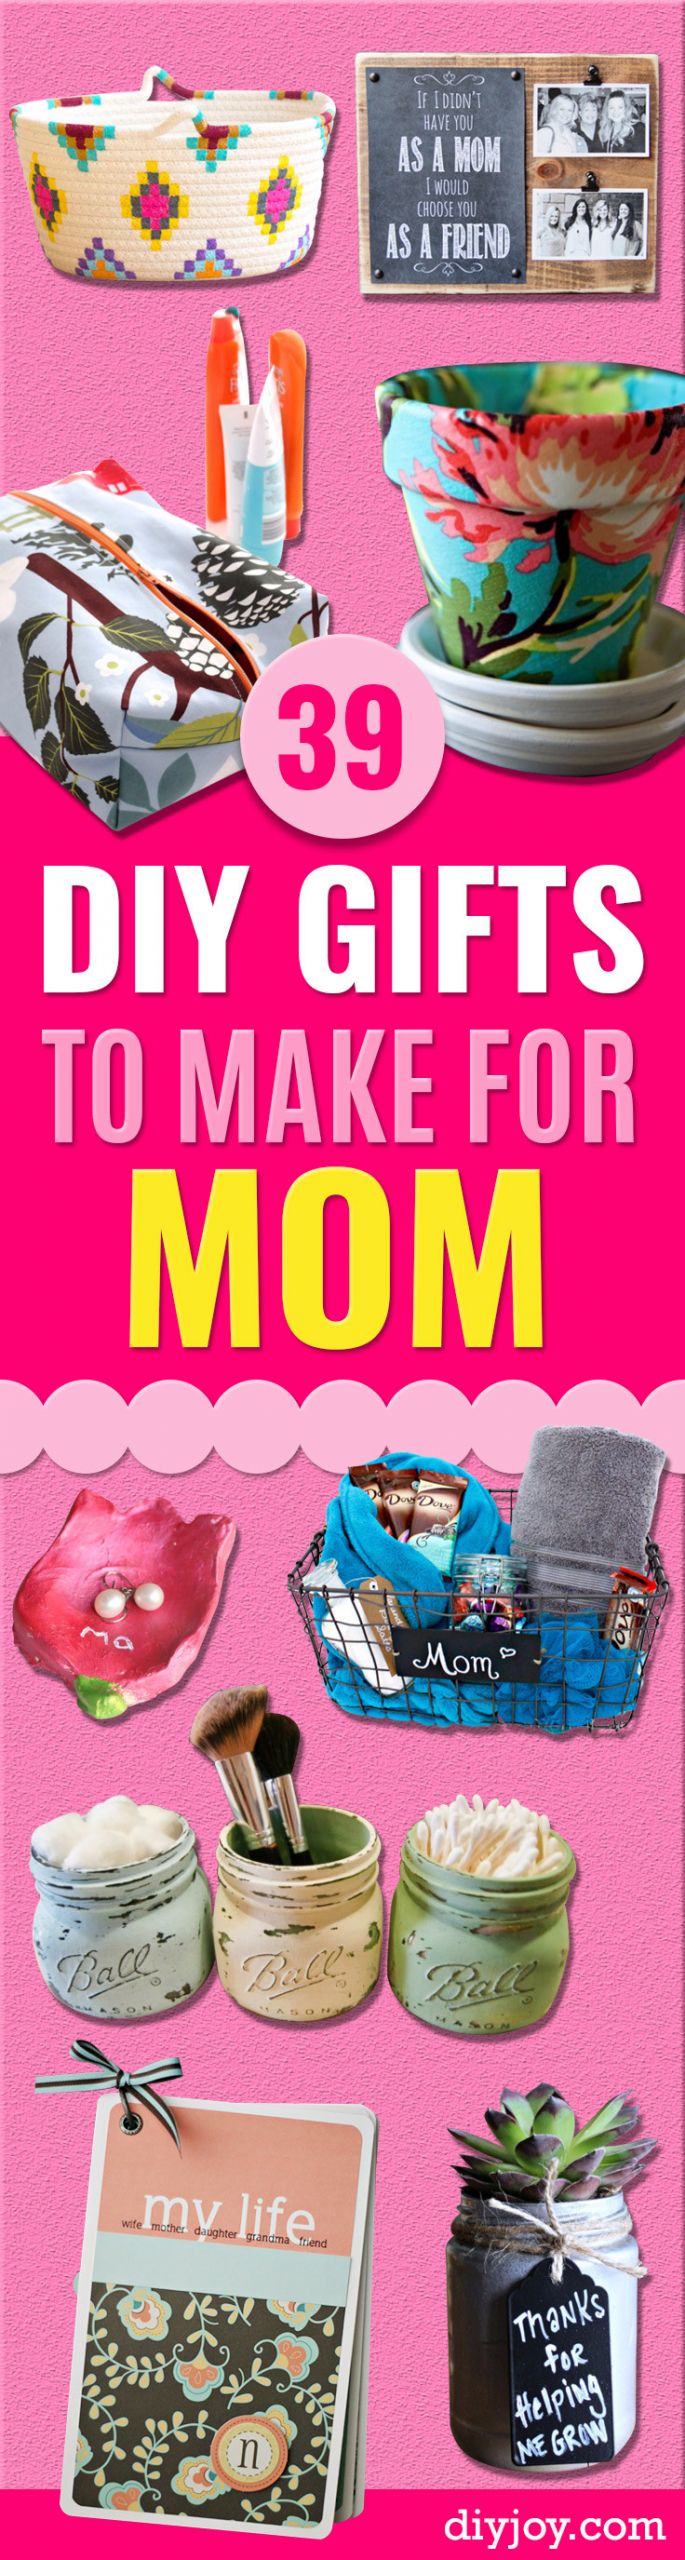 Cute DIY Gifts For Mom
 39 Creative DIY Gifts to Make for Mom